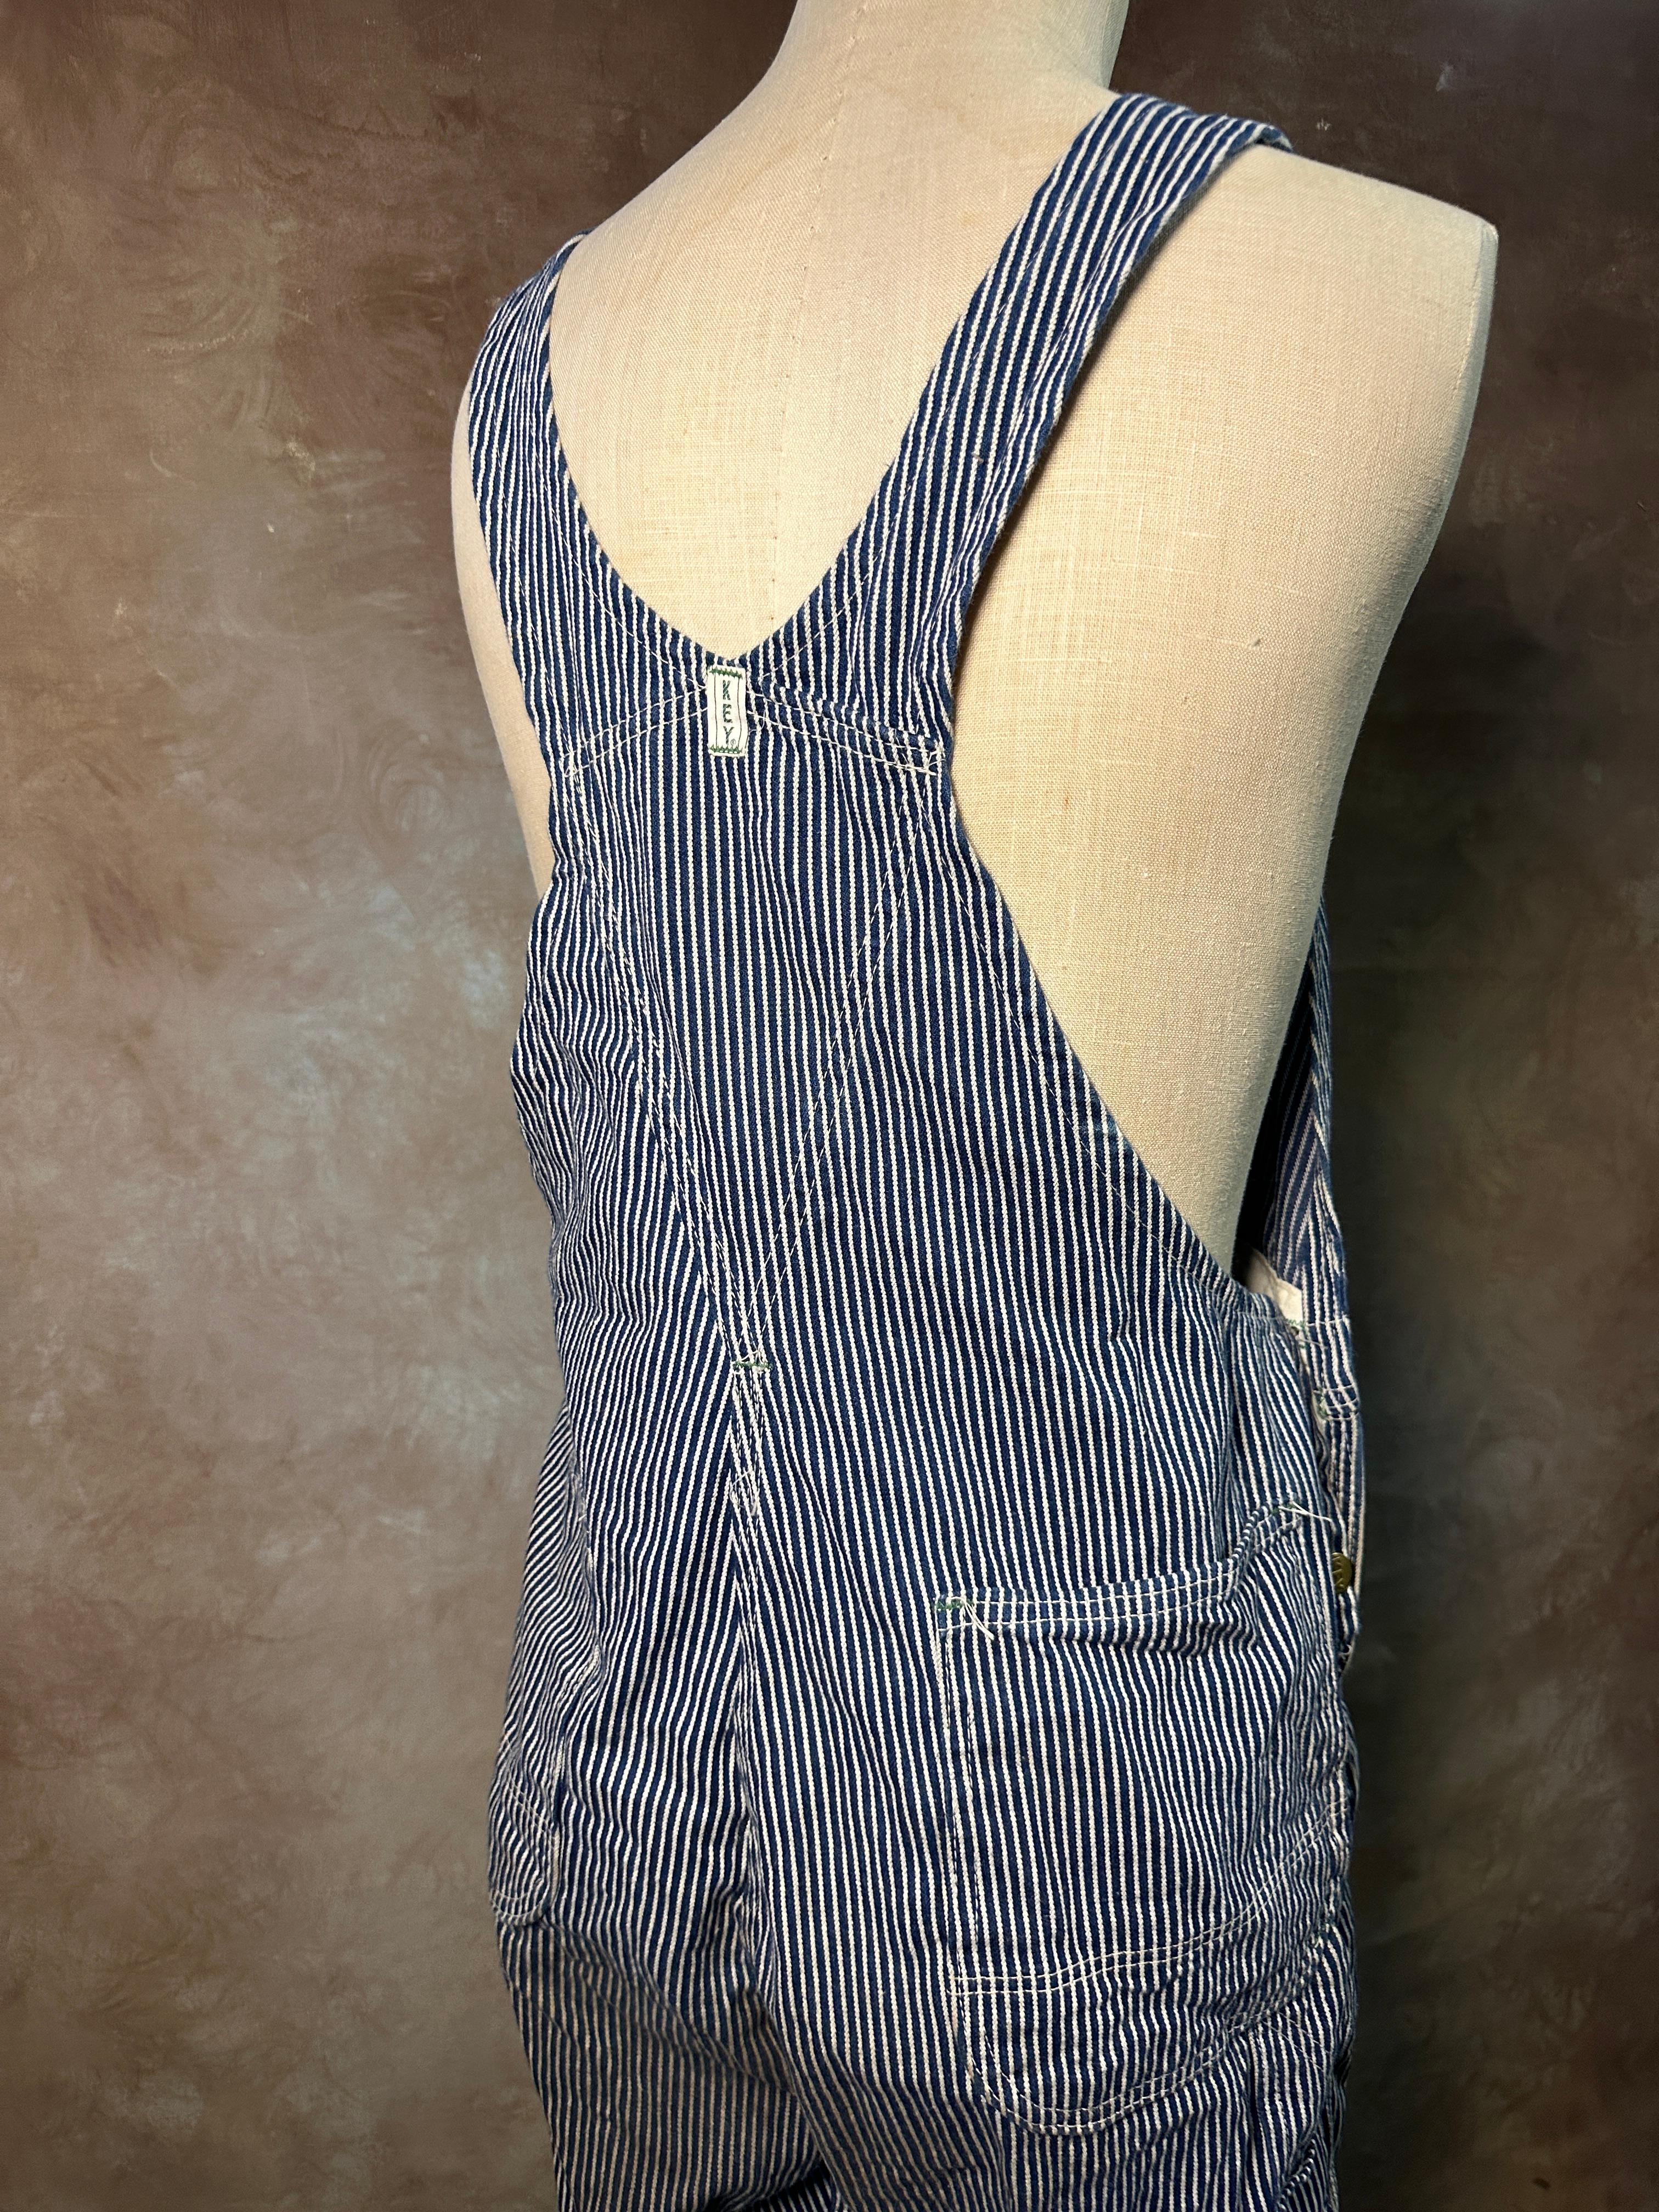 Vintage Key Imperial Railroad Striped Overalls